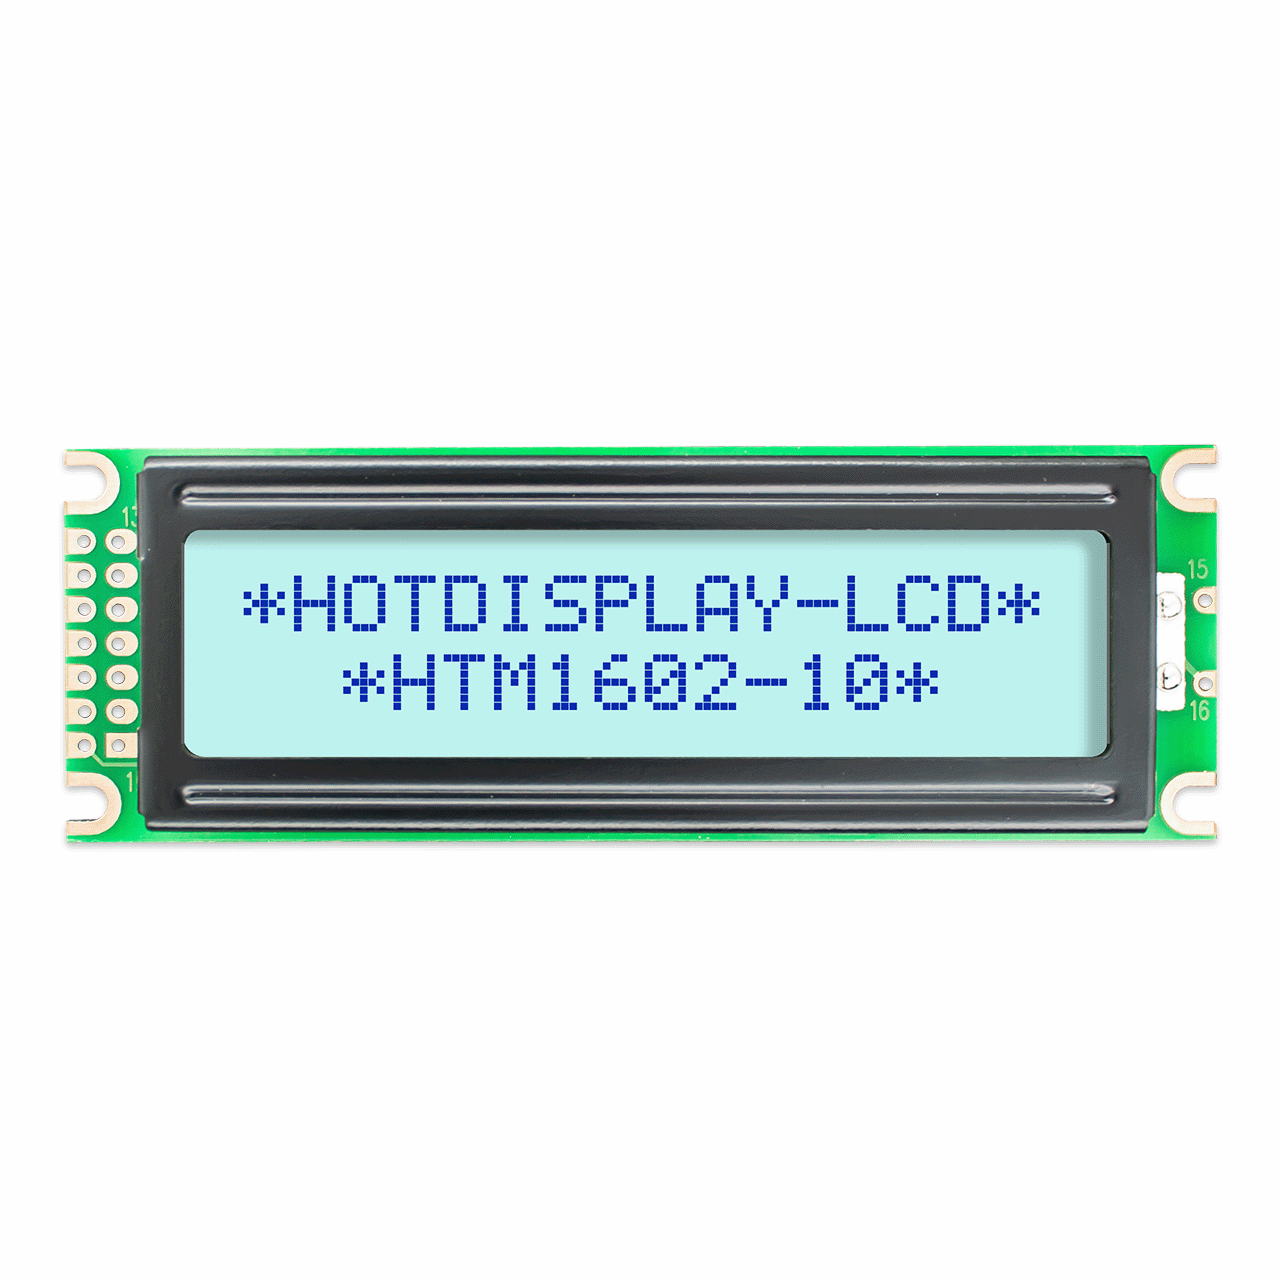 16X2 Character MONO LCD module | STN+ Gray Display with Side White Backlight 5.0V-Arduino